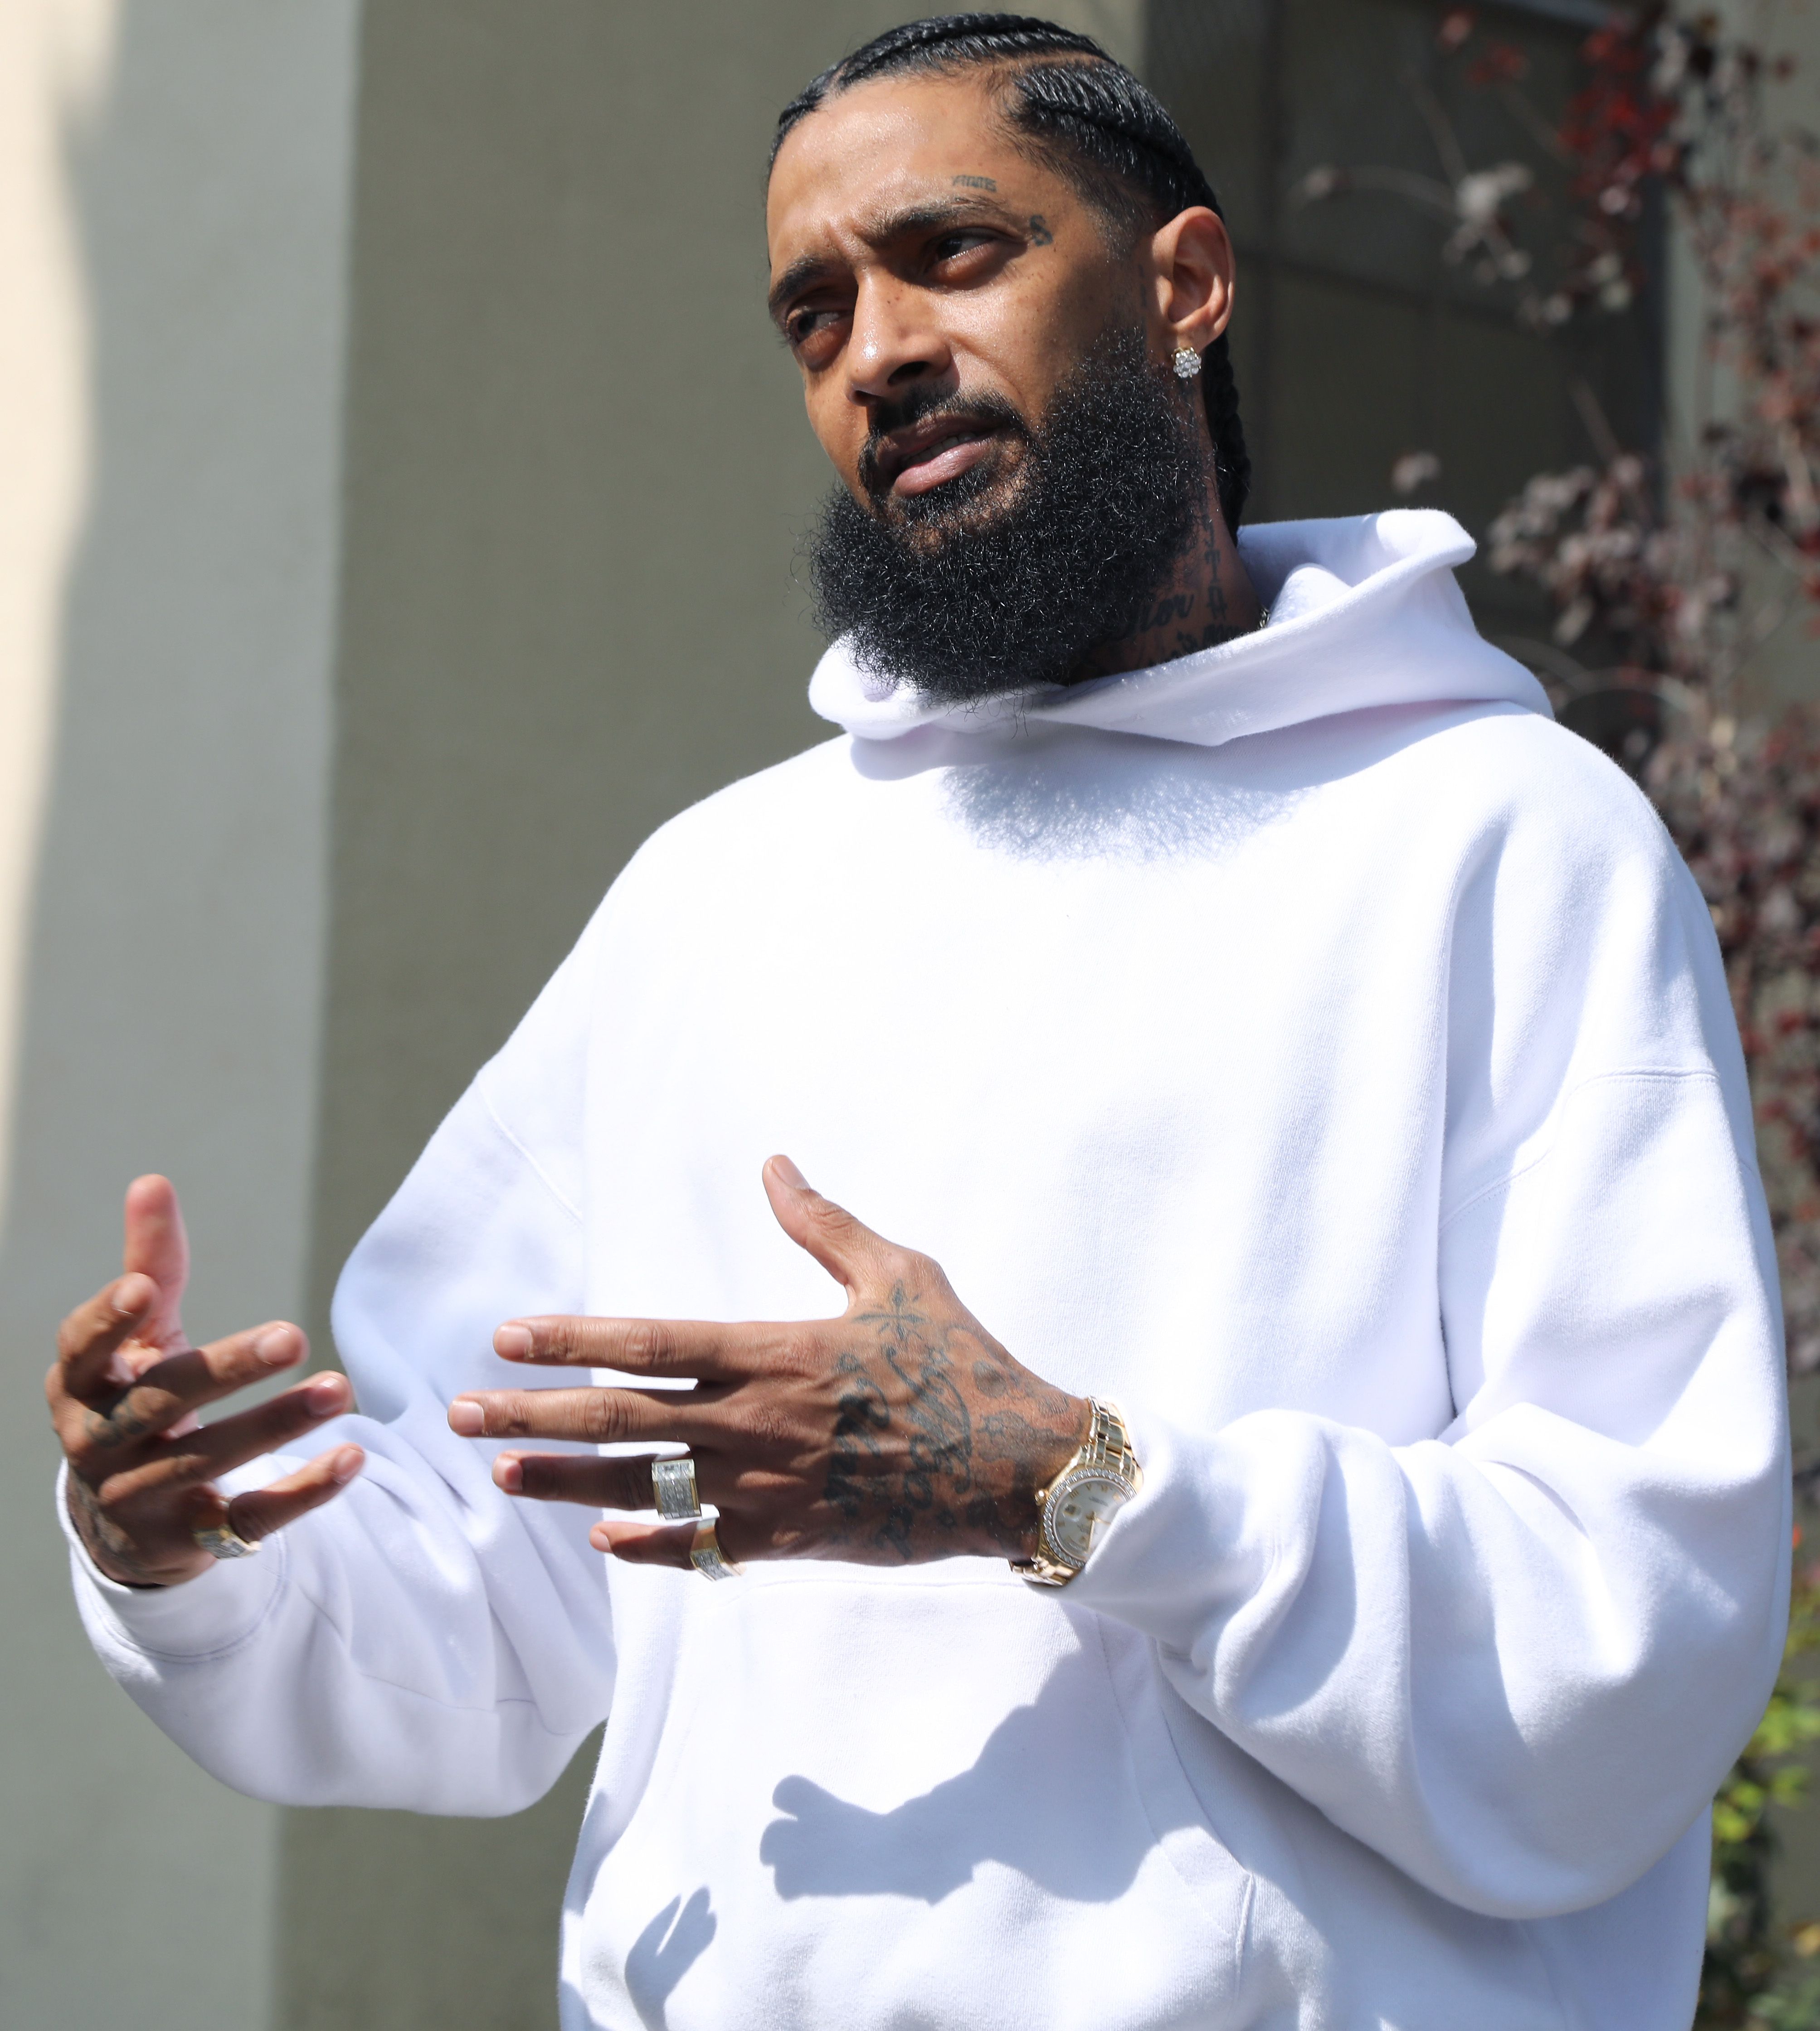 Nipsey Hussle during the Nipsey Hussle x PUMA Hoops Basketball Court Refurbishment Reveal Event on October 22, 2018 in Los Angeles, California. | Source: Getty Images